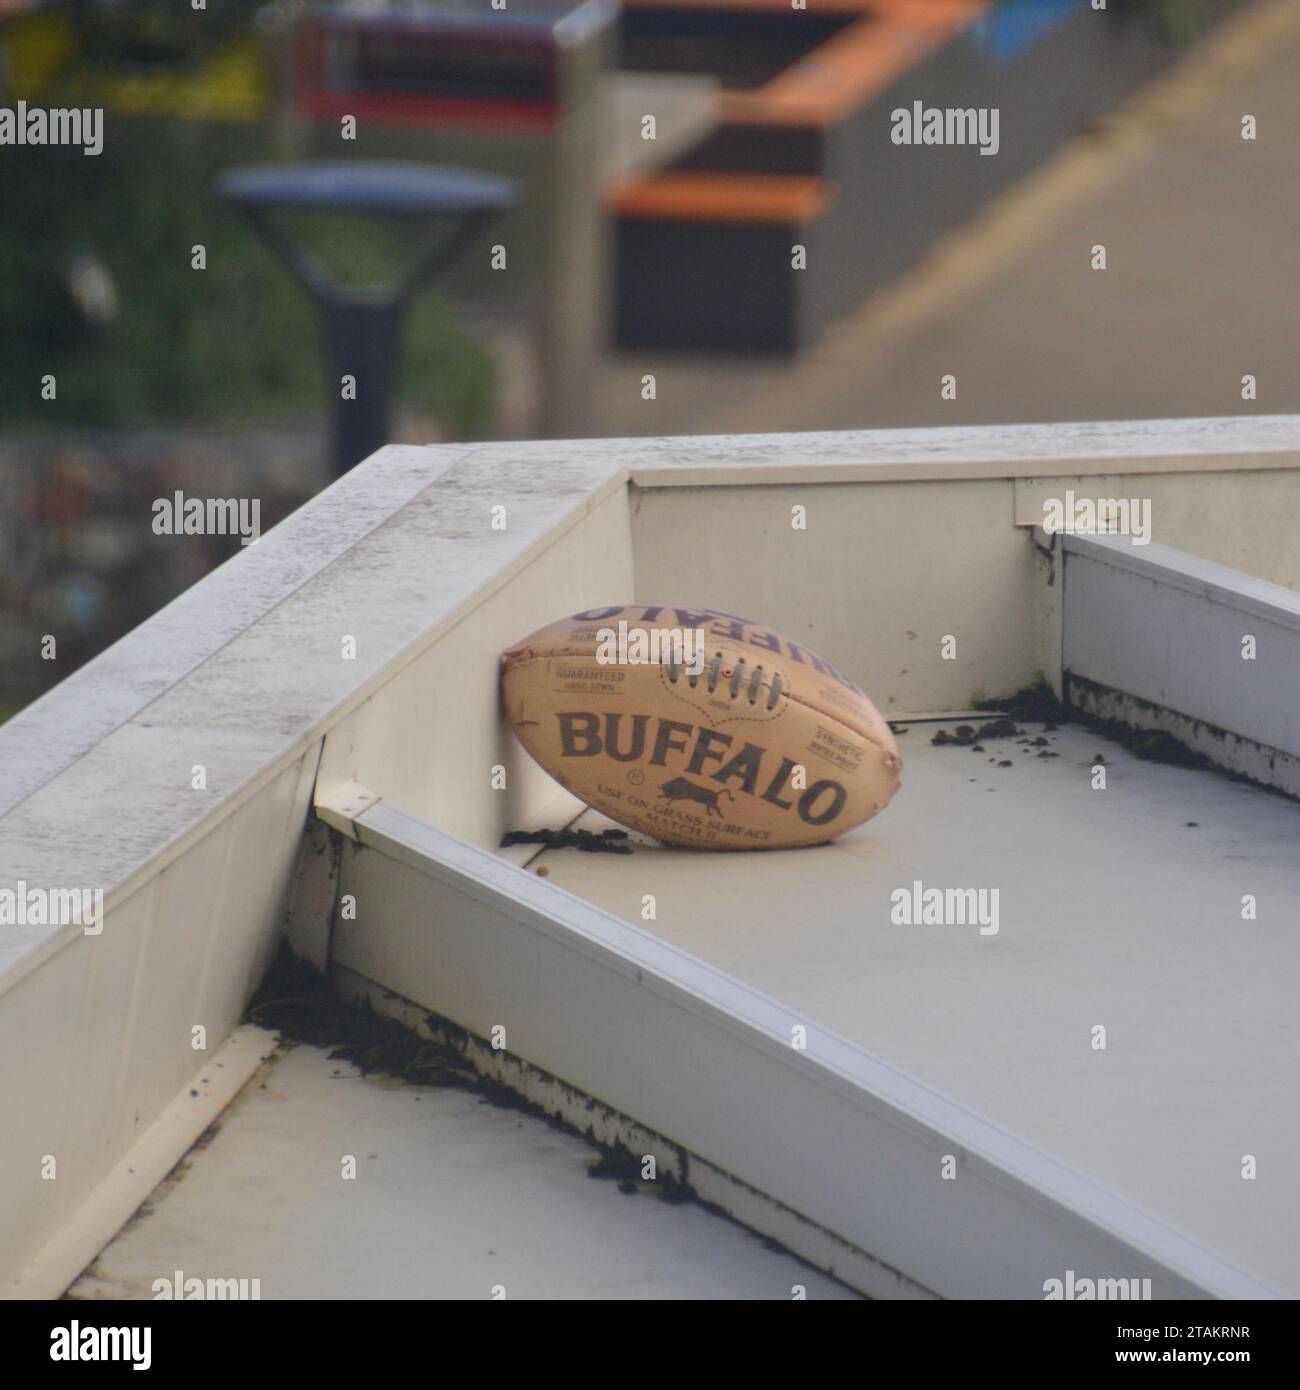 Lost Australian rules football abandoned on a flat rooftop where it was kicked and landed above parkland in the city of Perth is a forlorn sight Stock Photo